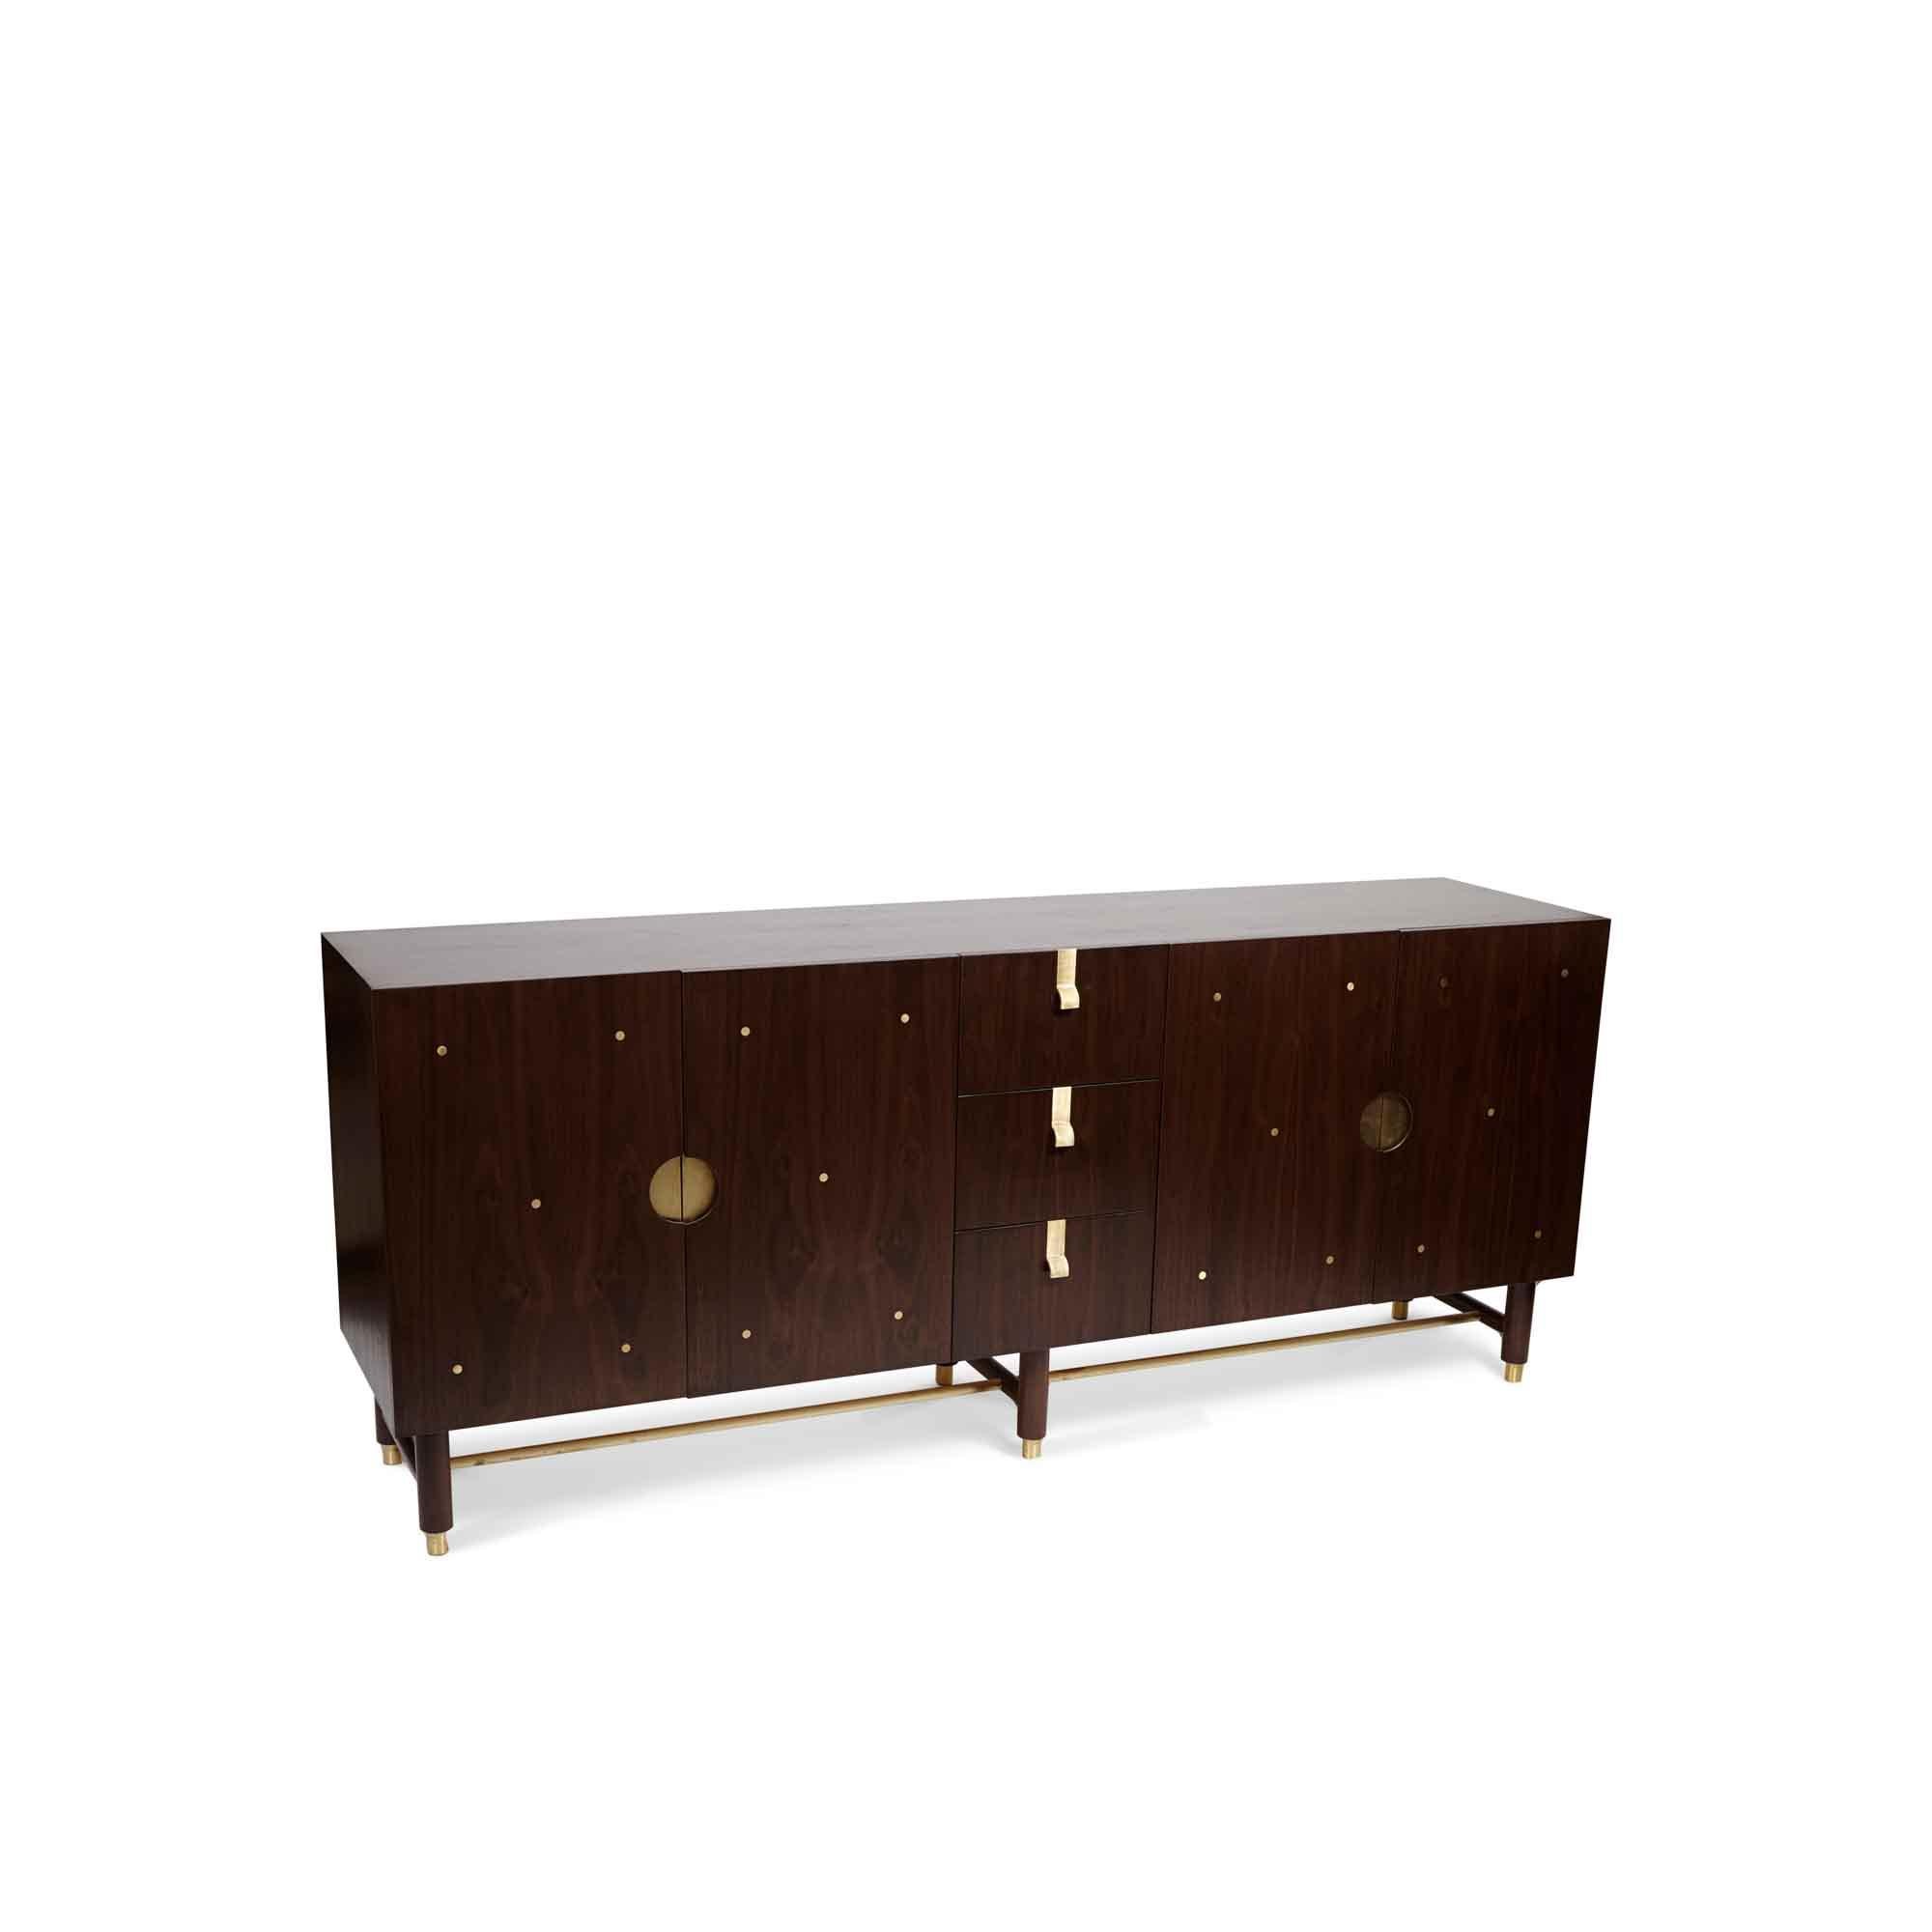 The Niguel Cabinet by Lawson-Fenning has a brass stretcher on the base, brass inlaid details on the doors, and insert brass handles. The interior is lacquered. 

The Lawson-Fenning Collection is designed and handmade in Los Angeles, California.